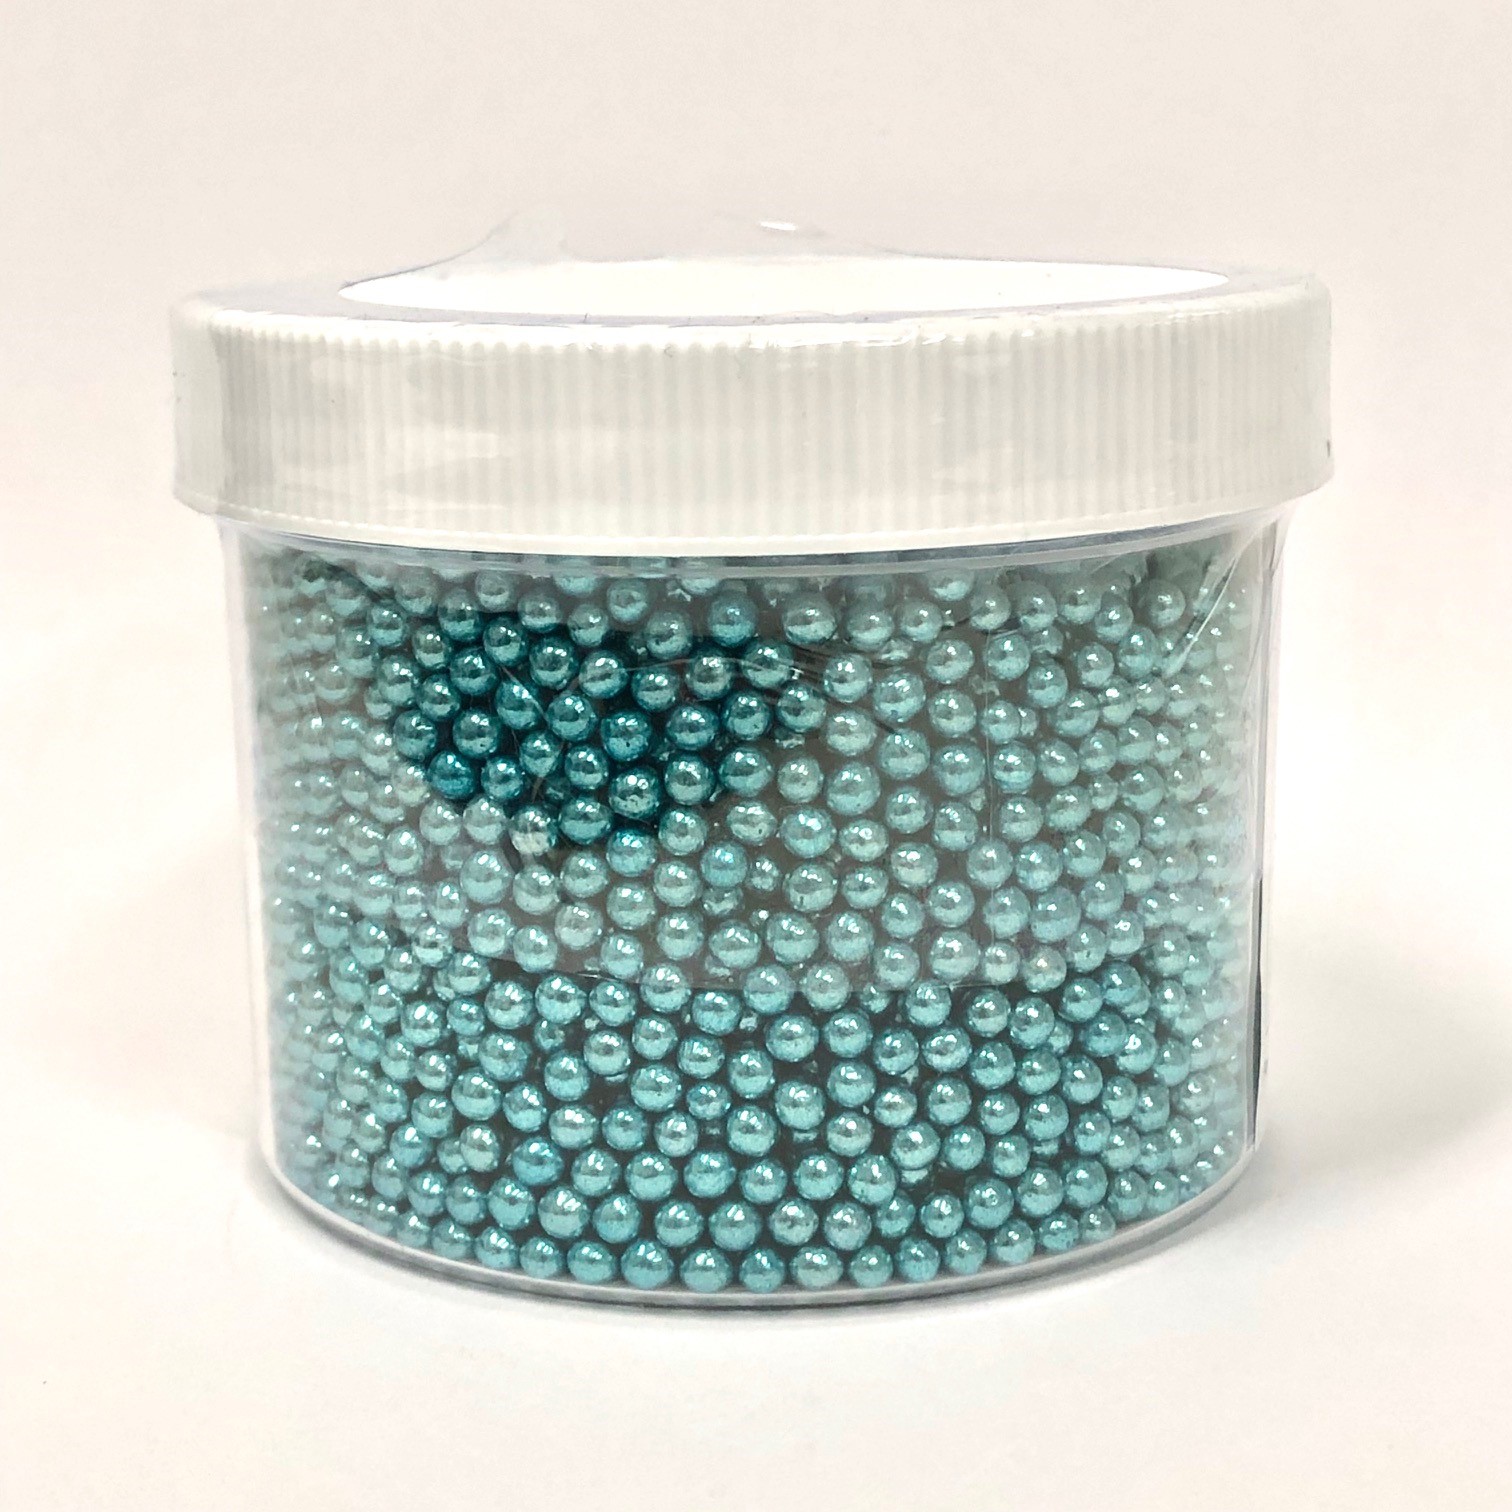 Dragee Metallic Turquoise 4mm - 250g by Confectioners Choice